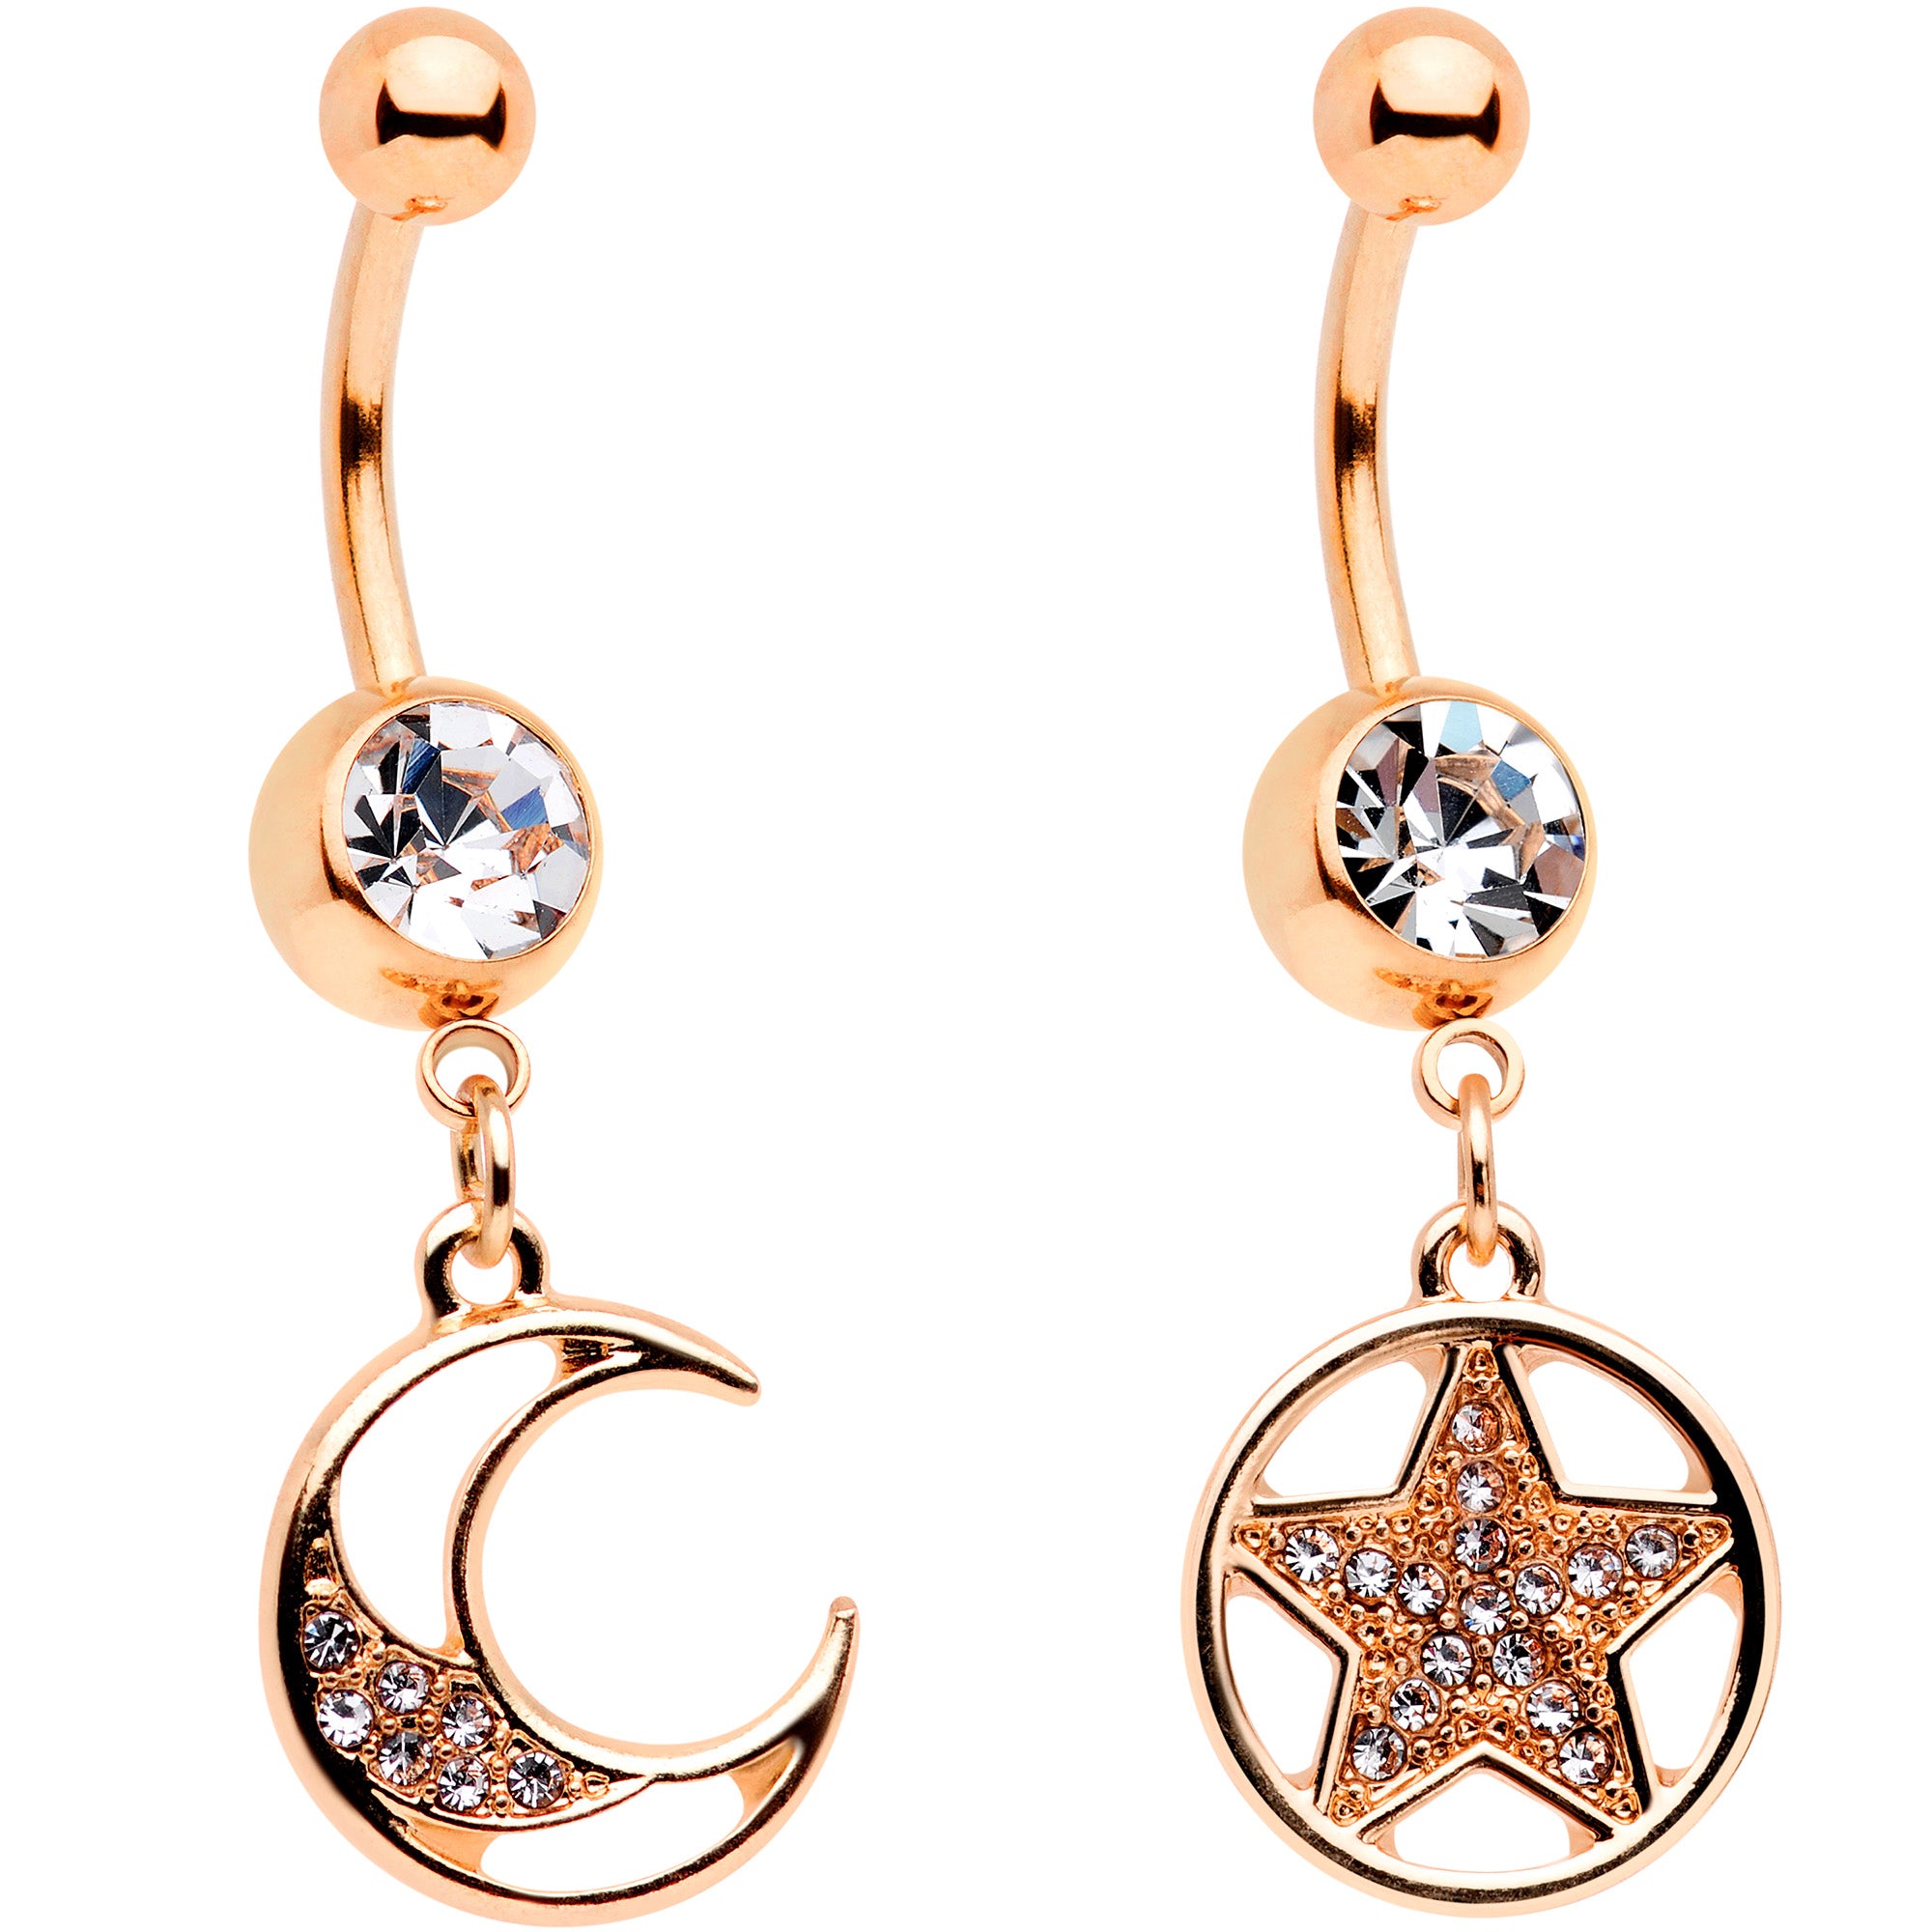 Clear Gem Rose Gold Tone Magic Moon Star Dangle Belly Ring Set of 2